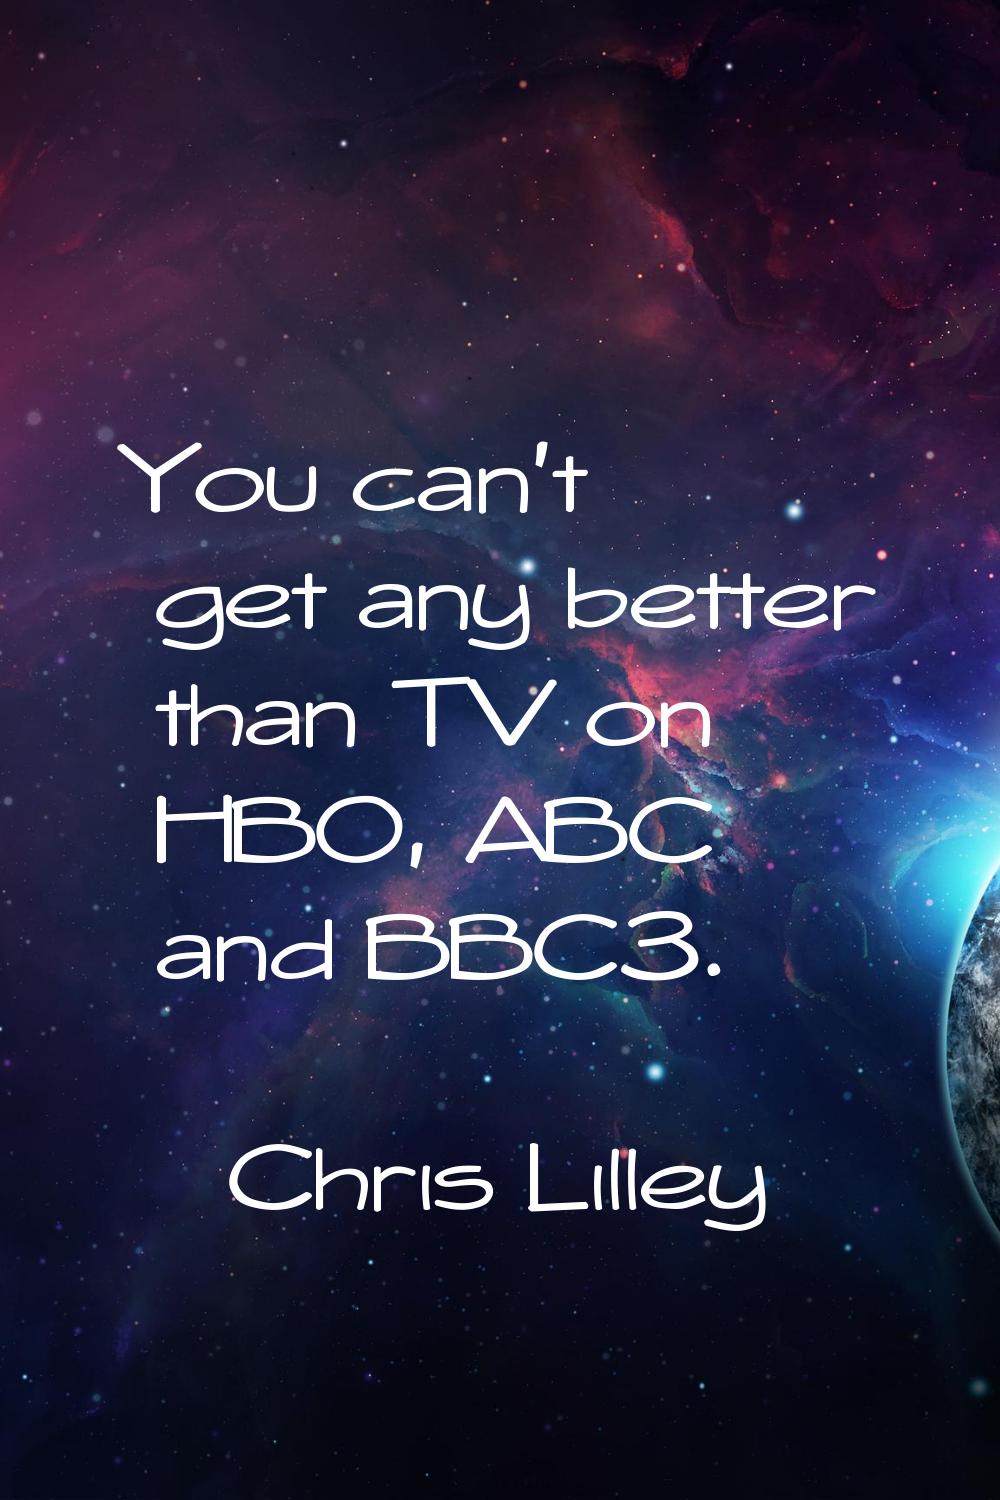 You can't get any better than TV on HBO, ABC and BBC3.